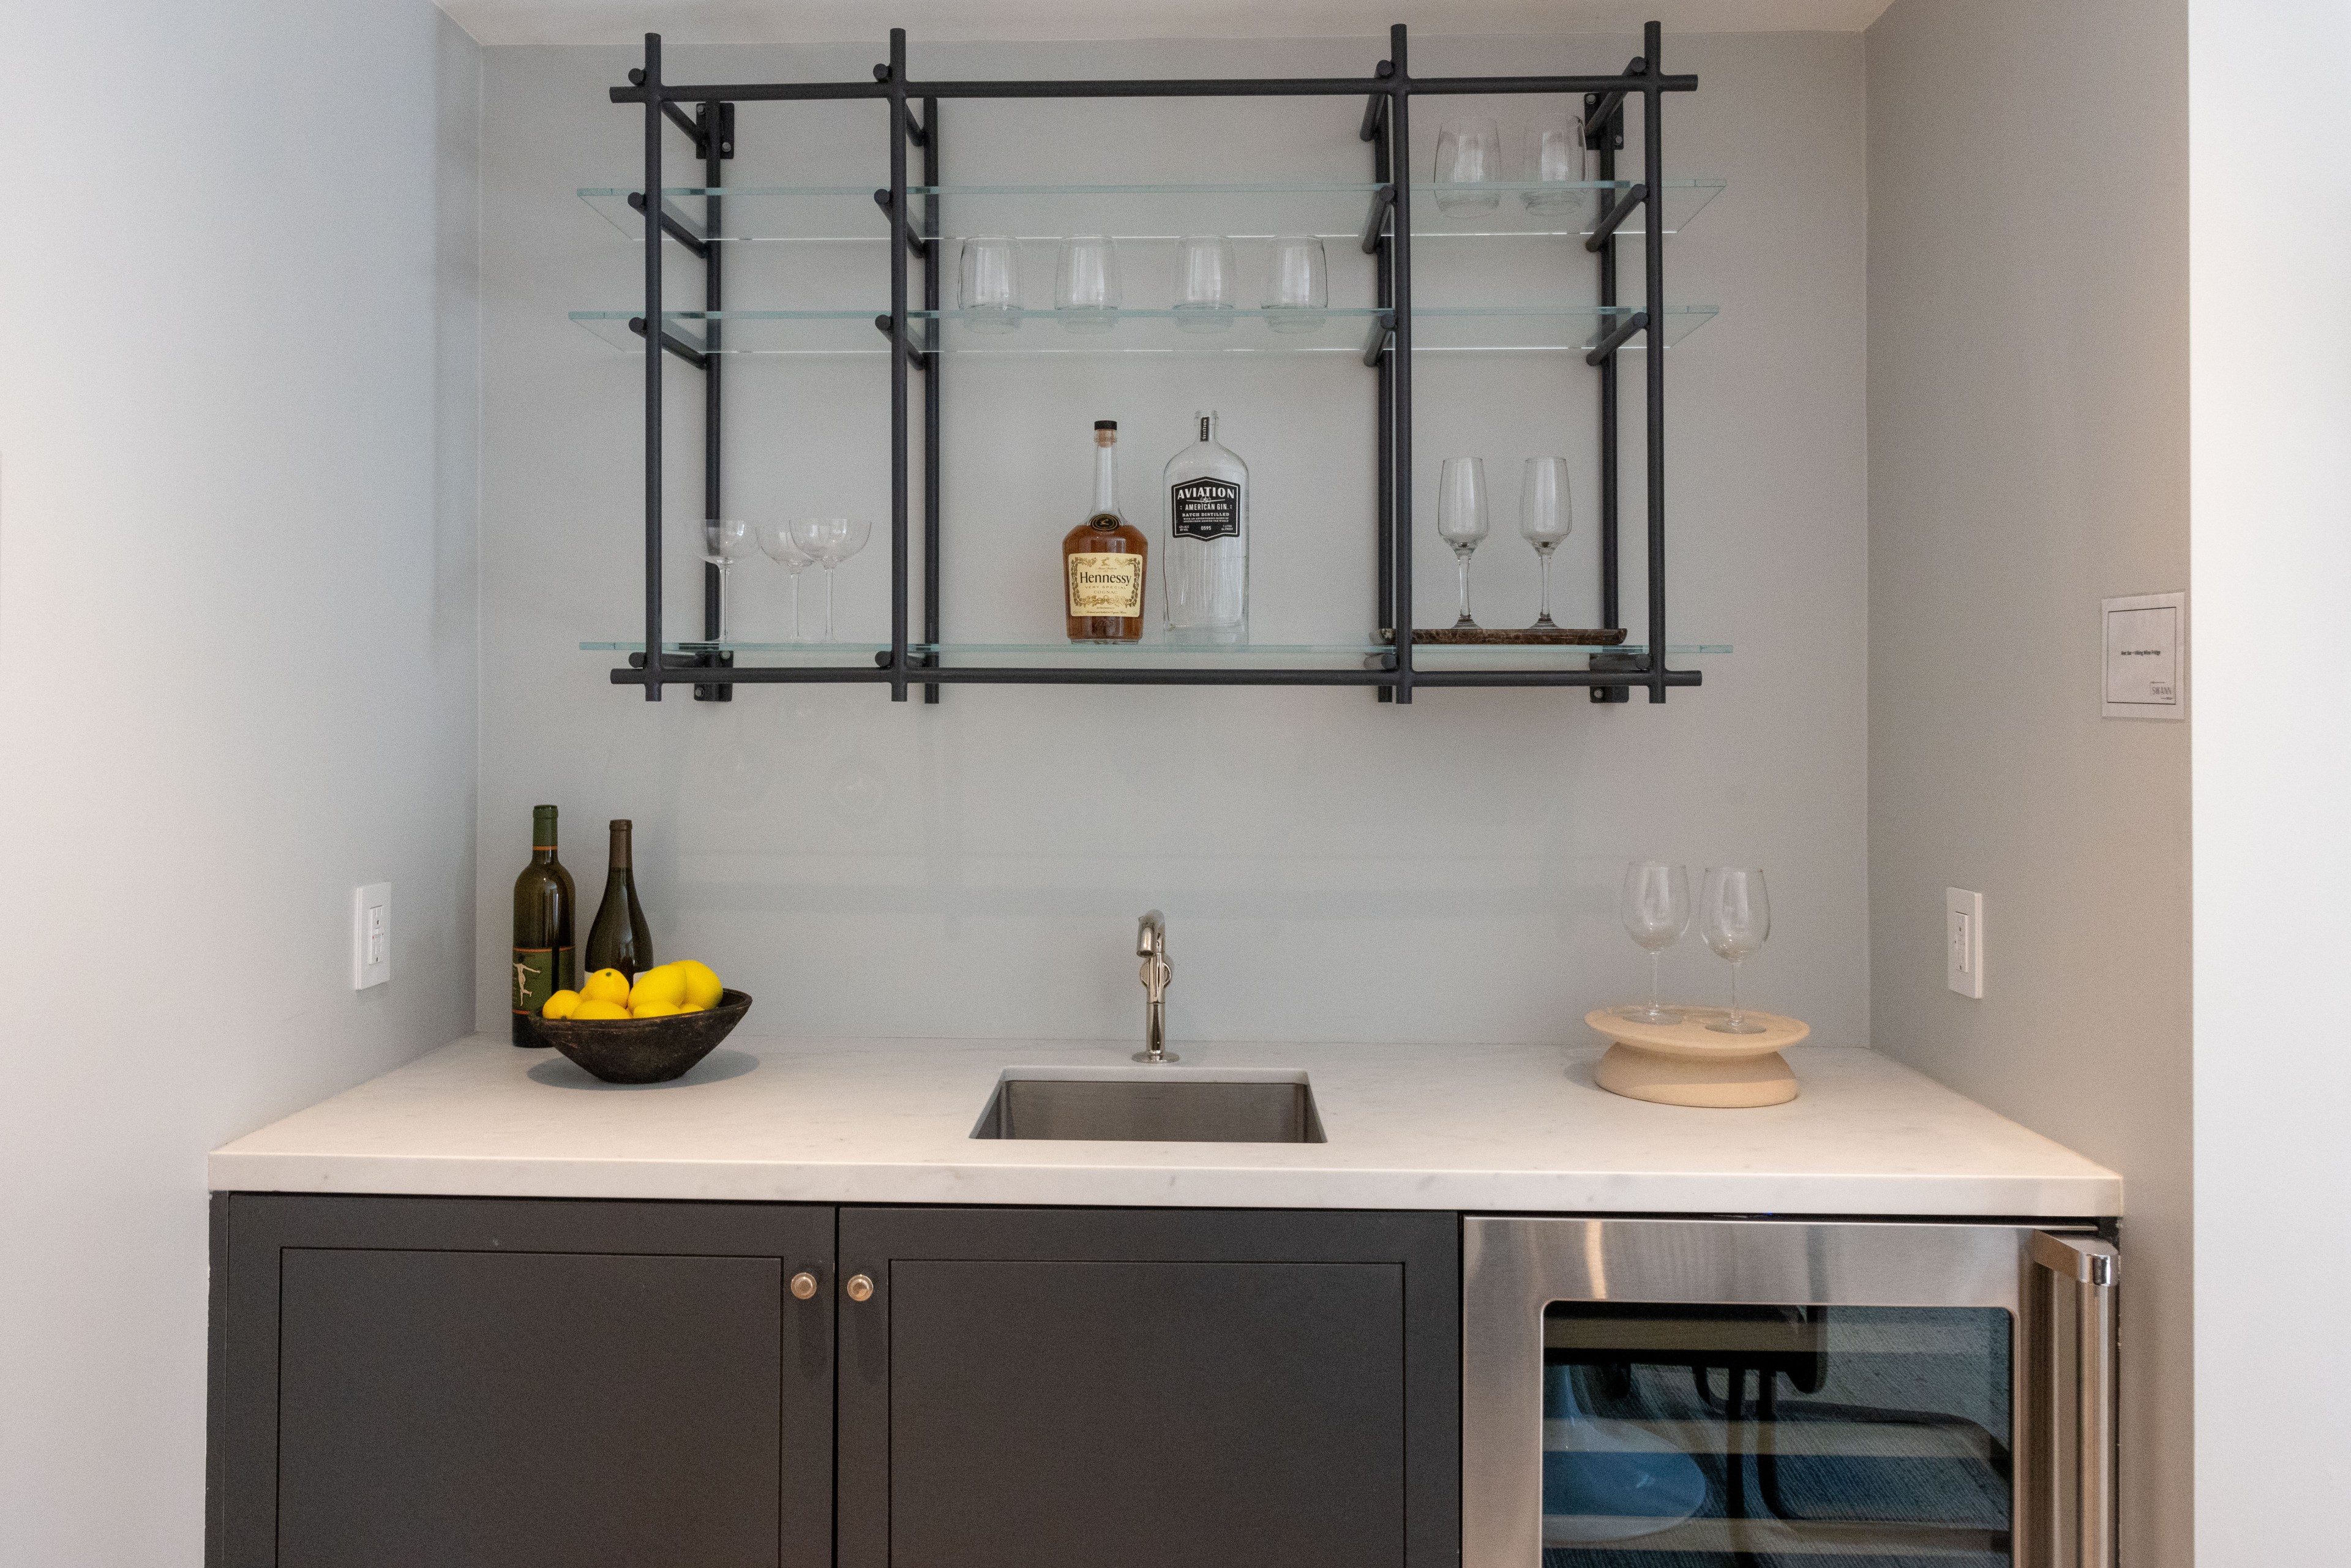 A compact home bar with a marble countertop, a small sink, and dark lower cabinets. Shelves above hold glasses, a bottle of Hennessy, a gin bottle, and lemons.